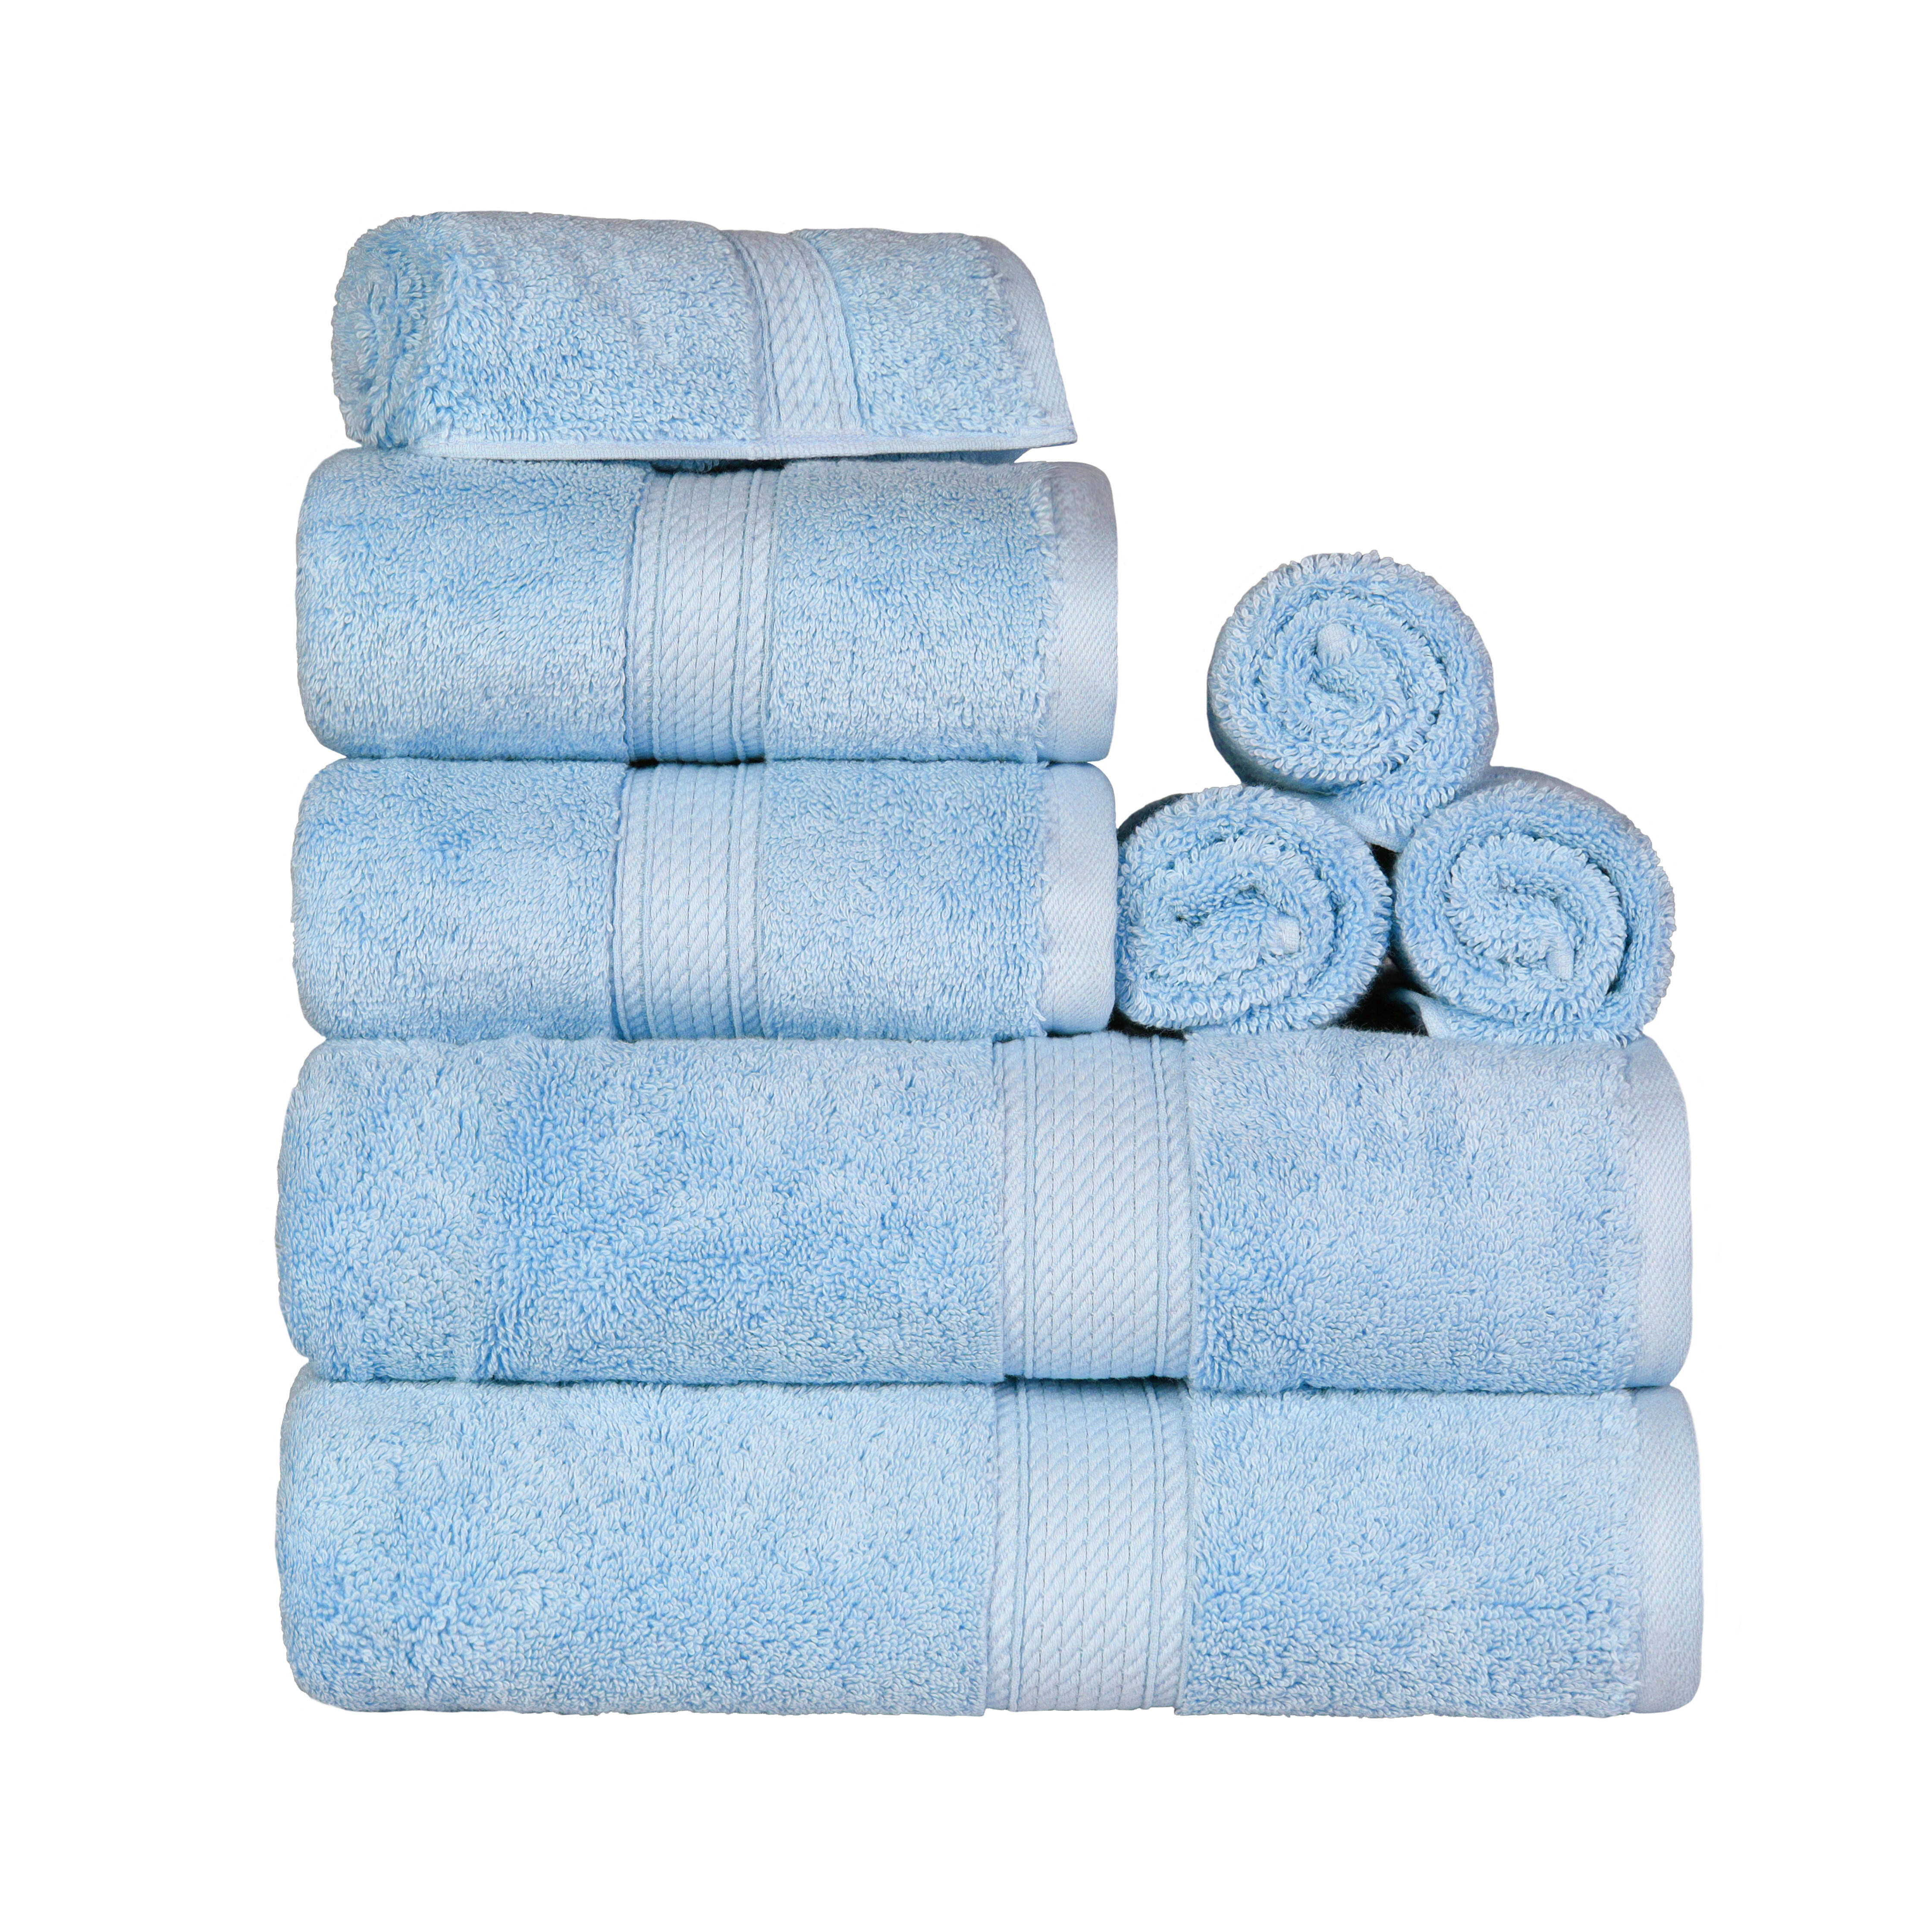 900 GSM Egyptian Cotton Towel Set of 8, Plush Absorbent Face, Hand & Bath  Towels